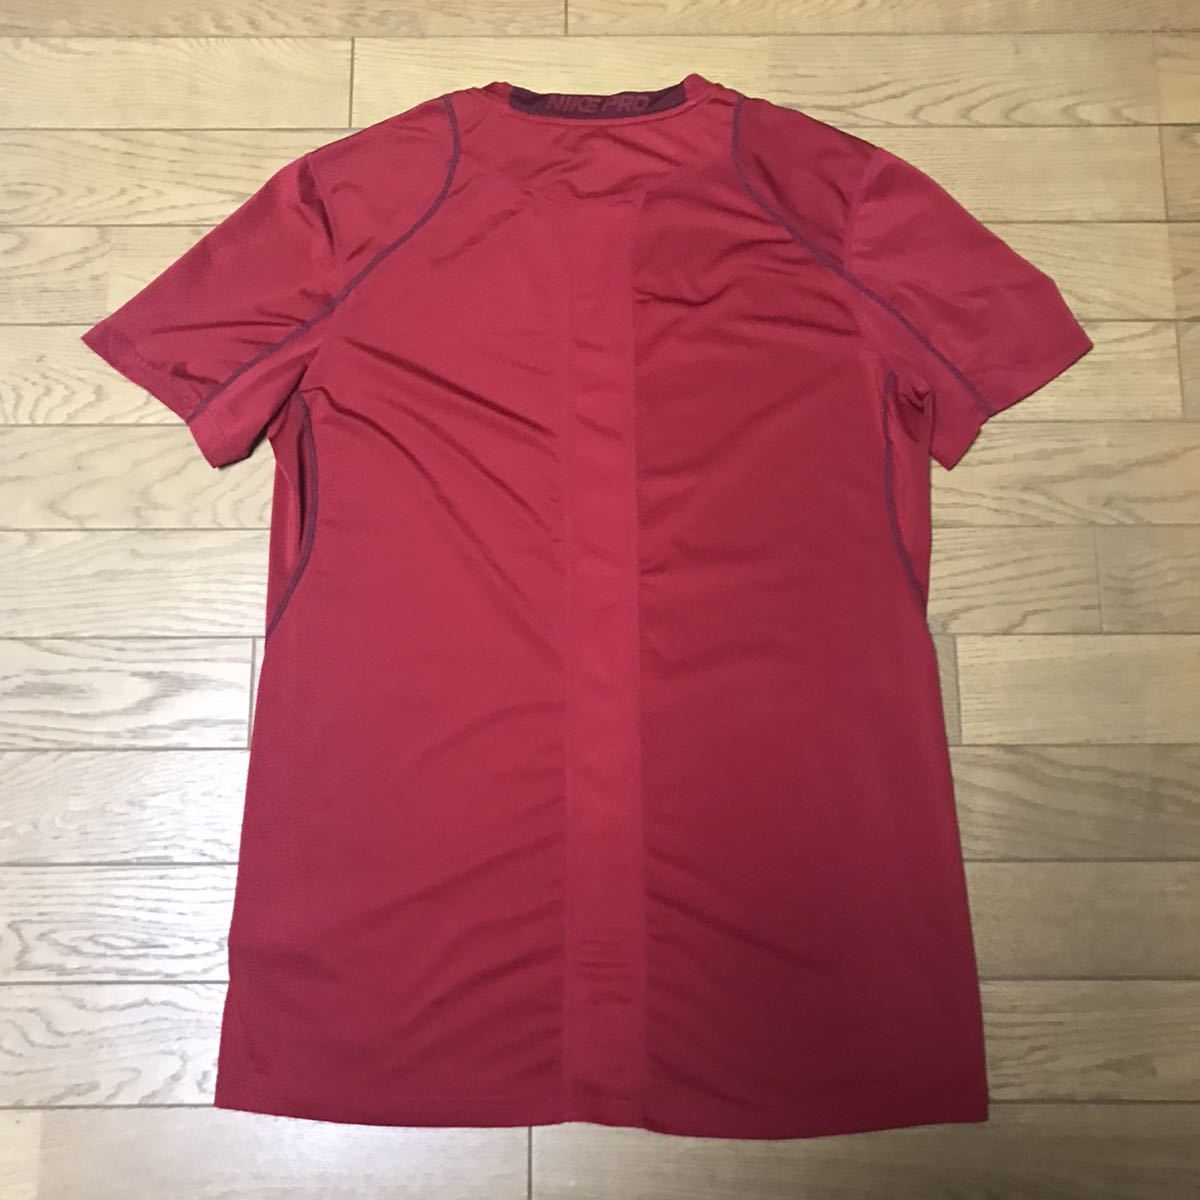 NIKE PRO MEN’S DRU-FIT FUTTED SHORT SLEEVE COMPRESSION SHIRTS size-M(着丈70身幅50) 中古(美品) 送料無料 NCNR